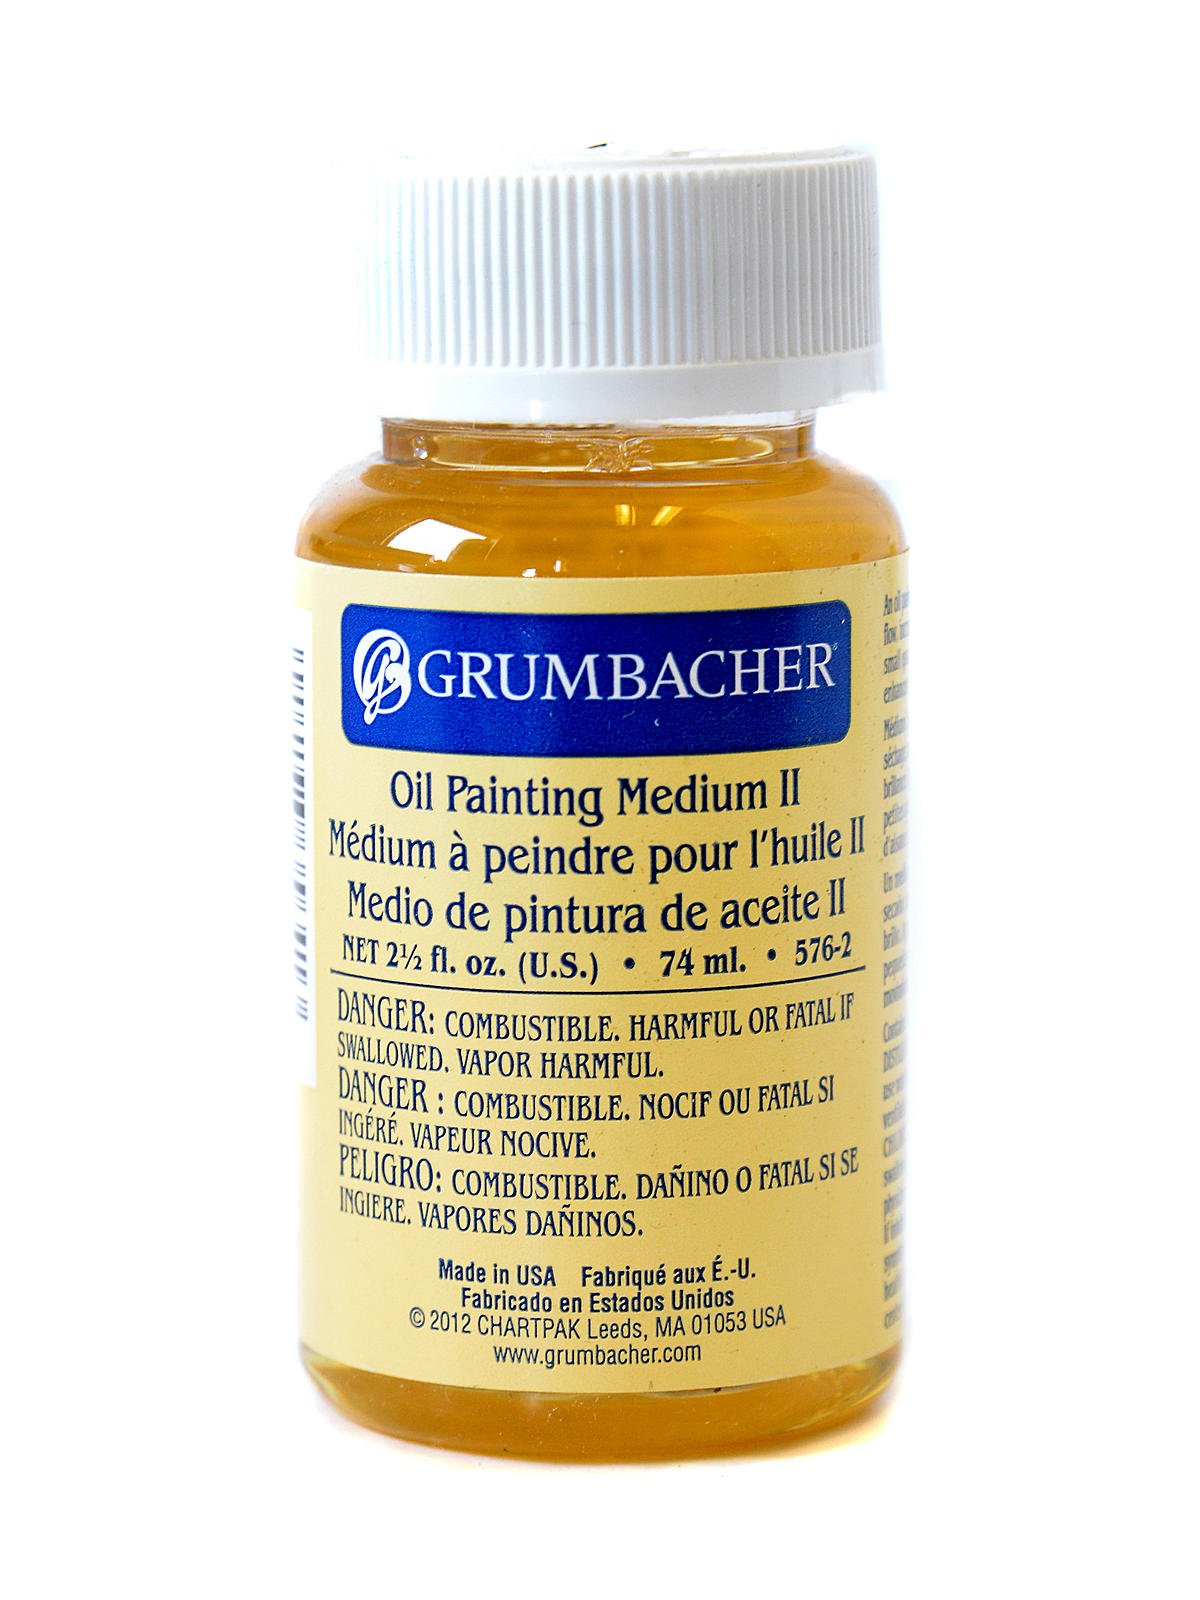 Grumbacher Sun-Thickened Linseed Oil Medium for Oil Paintings, 2-1/2 Oz.  Jar, #5832